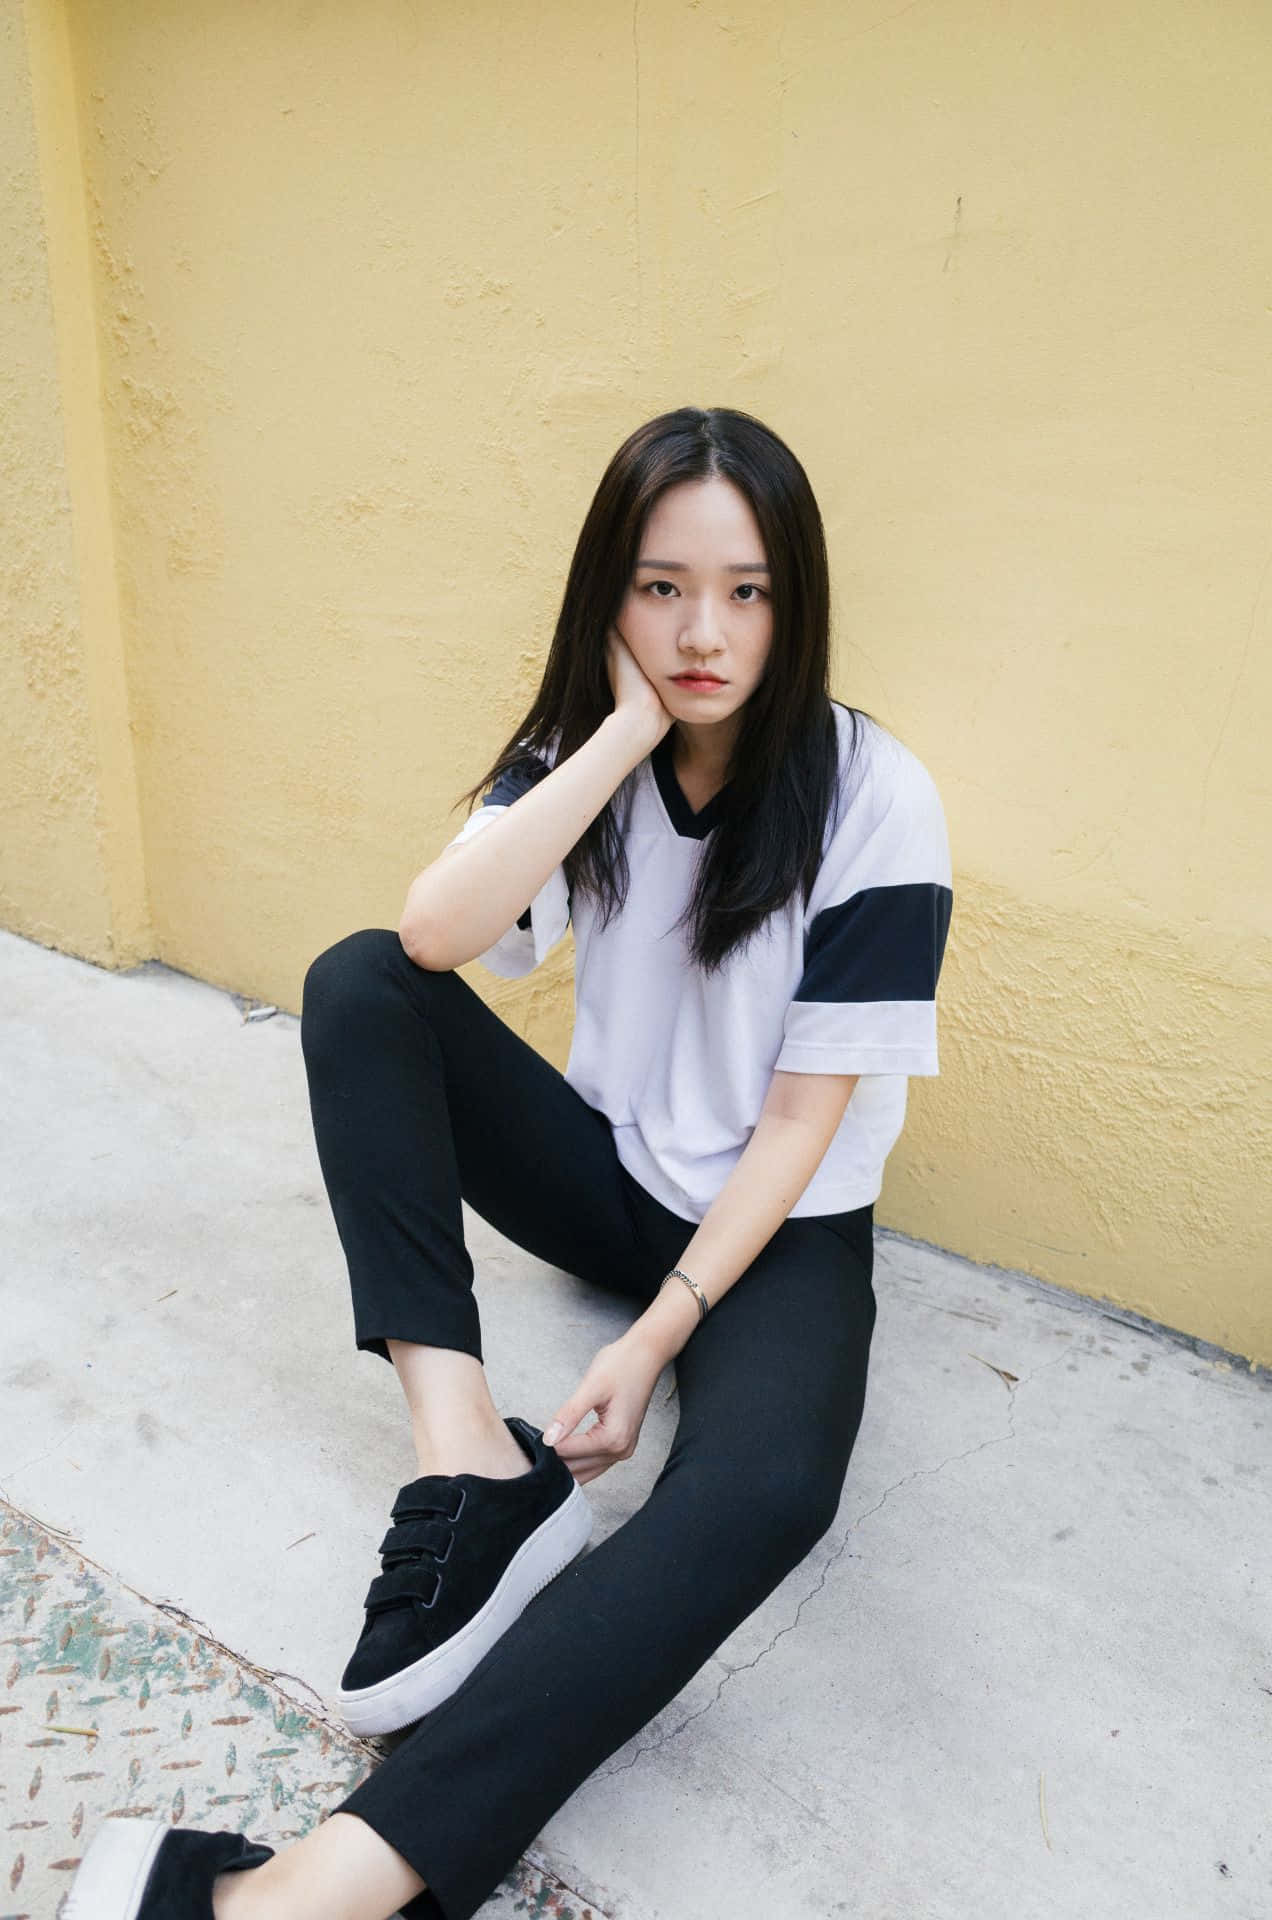 A Young Woman Sitting On The Ground Wearing Black Pants And White T - Shirt Wallpaper